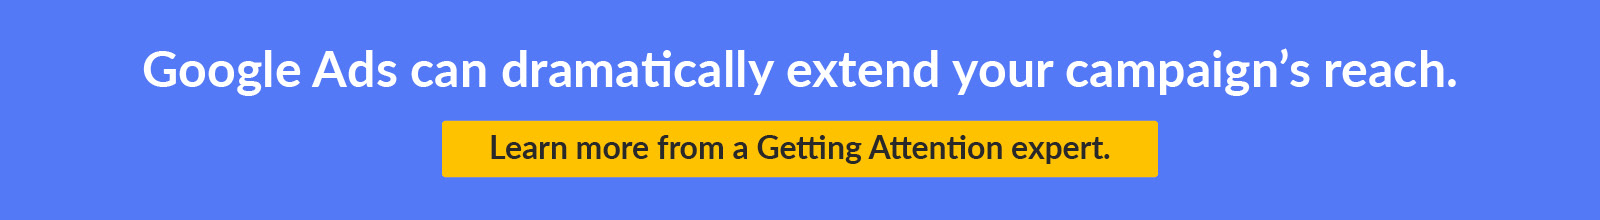 Click to schedule a consultation with the experts at Getting Attention, who can help you improve your nonprofit awareness campaigns with Google Ads.